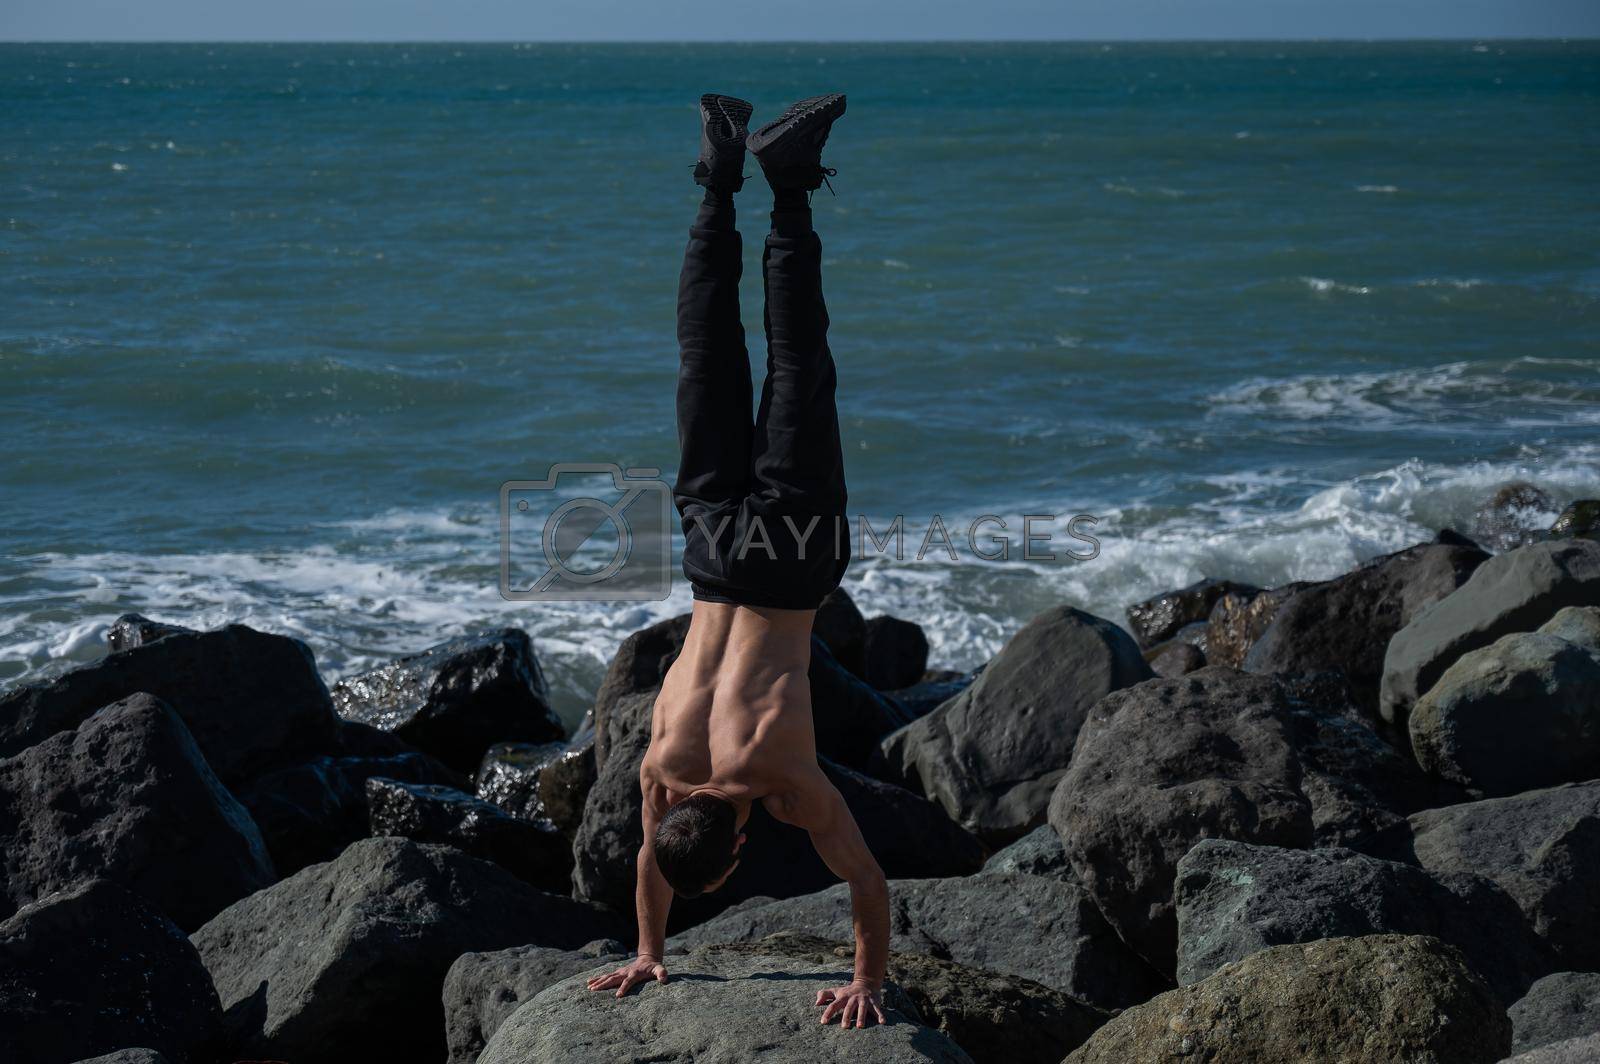 Royalty free image of Shirtless man doing handstand on rocks by the sea. by mrwed54